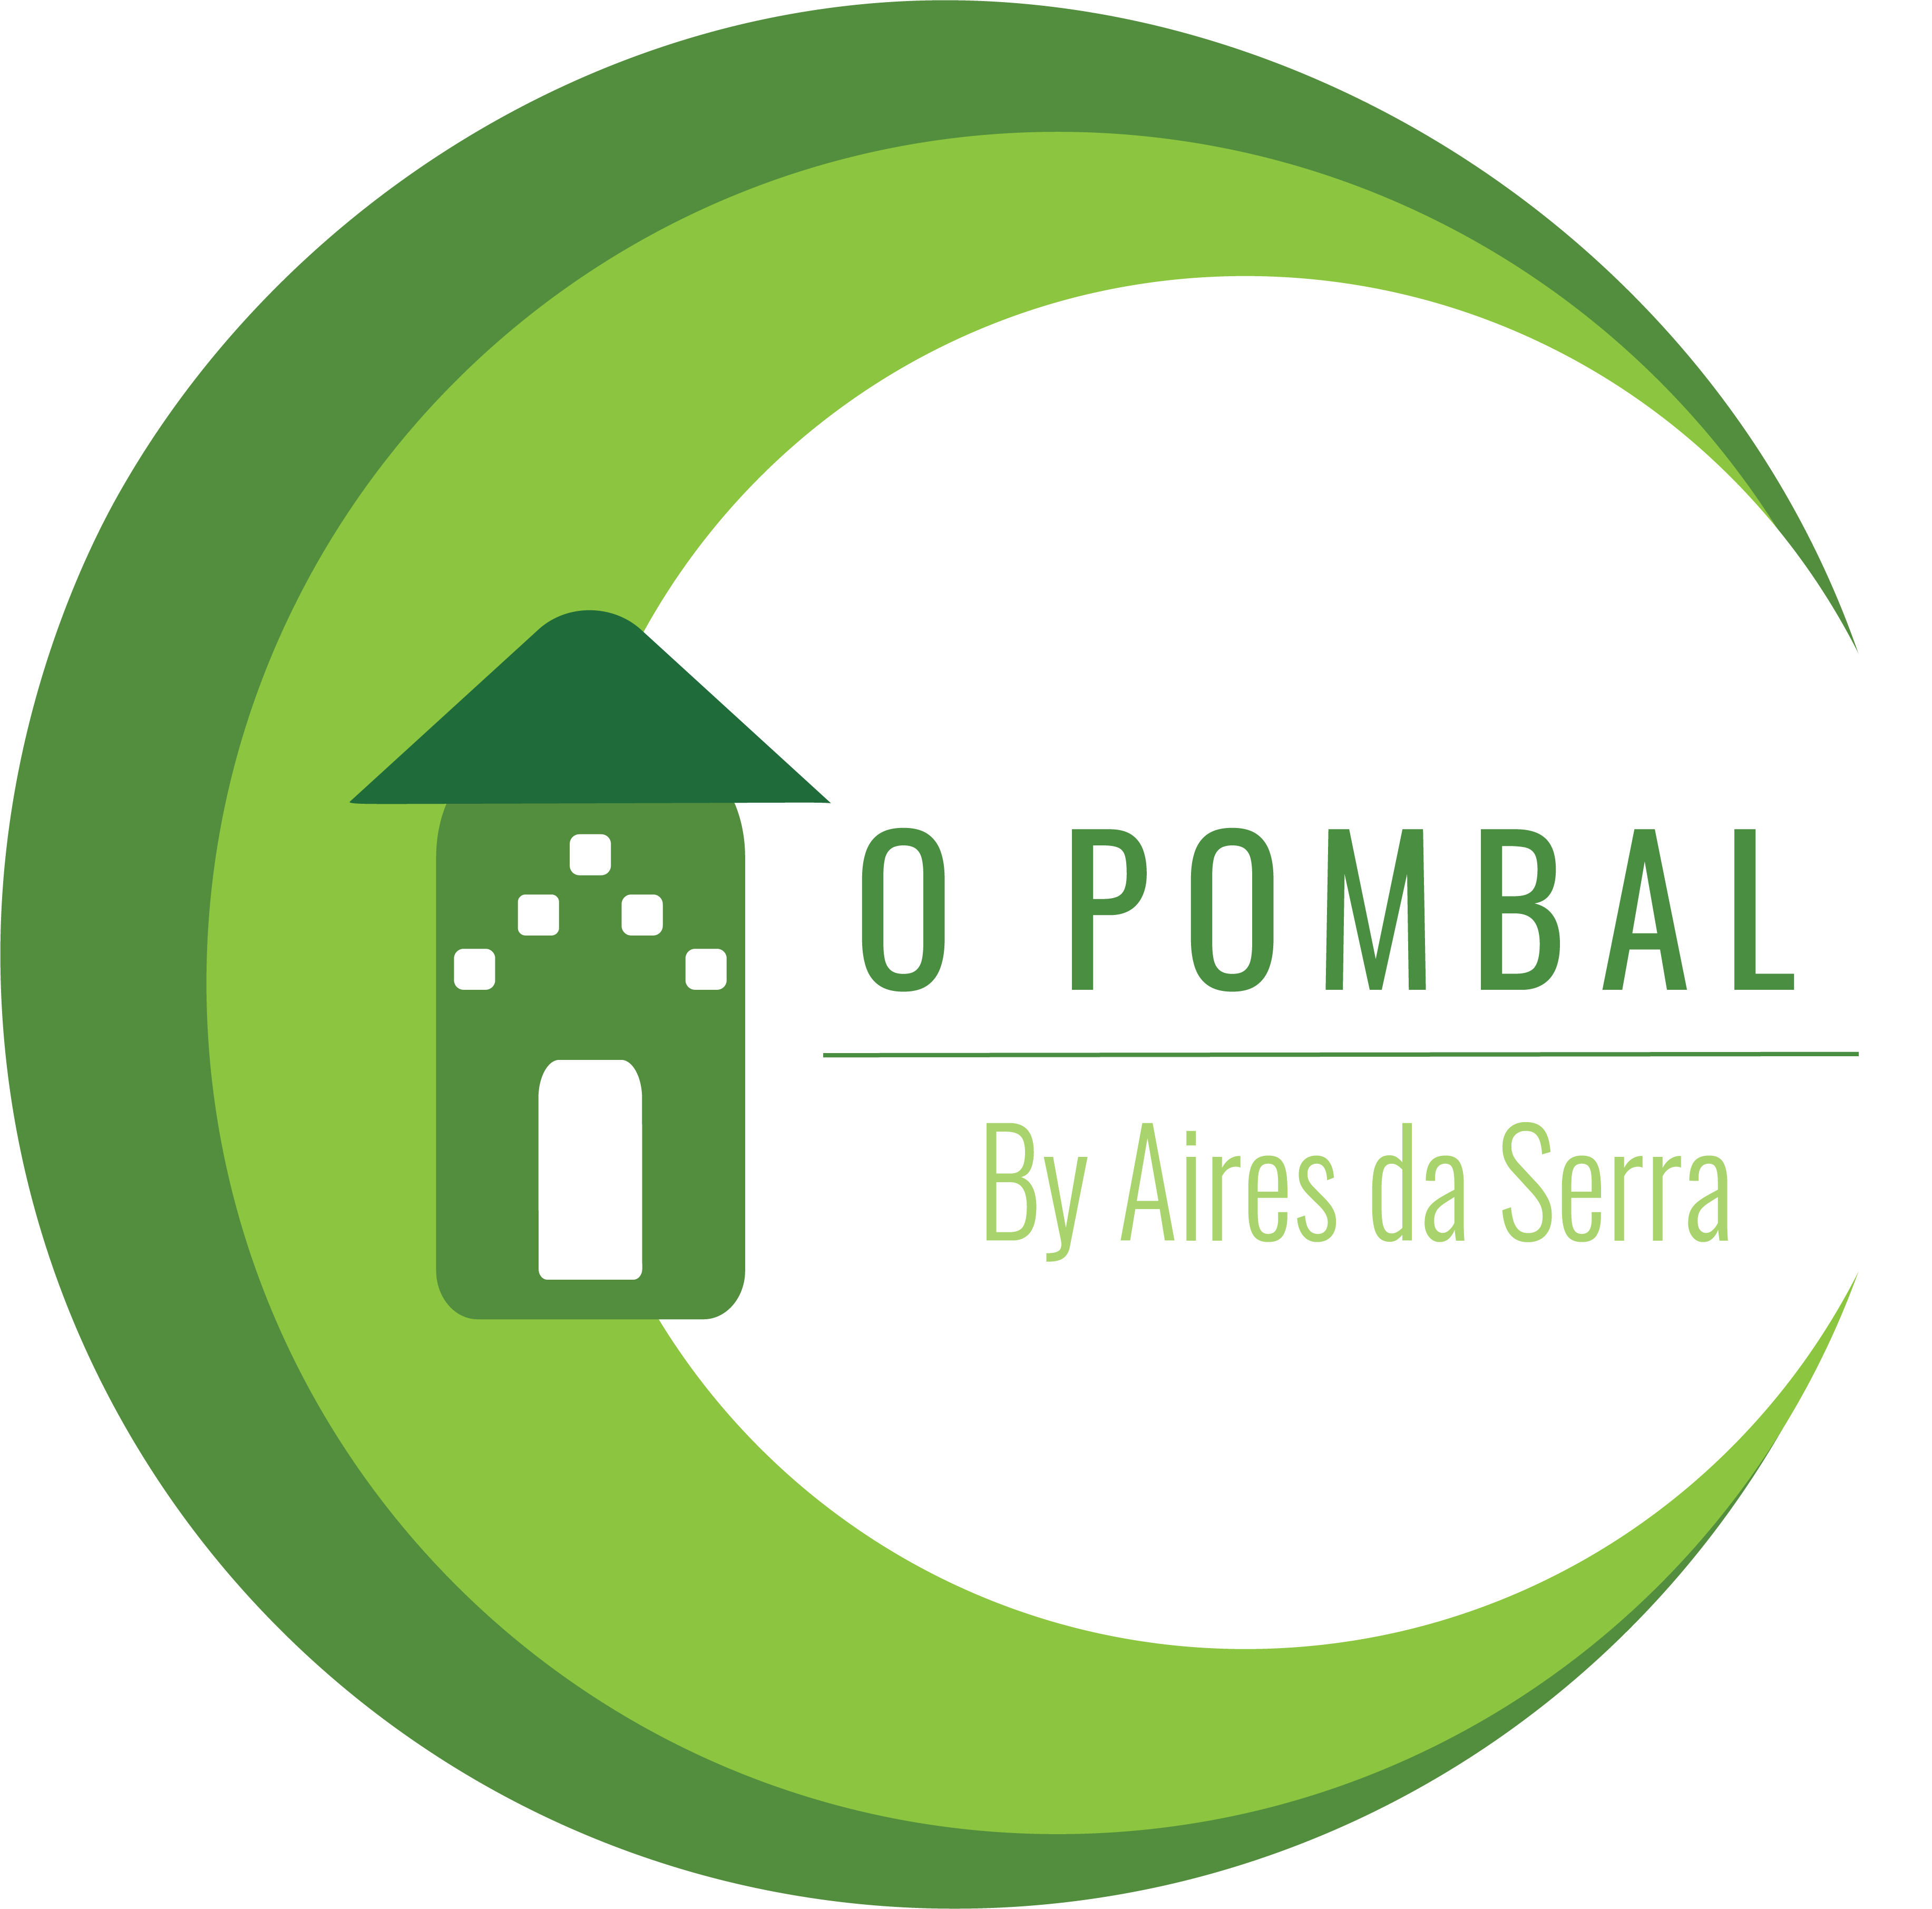 O Pombal by Aires da Serra